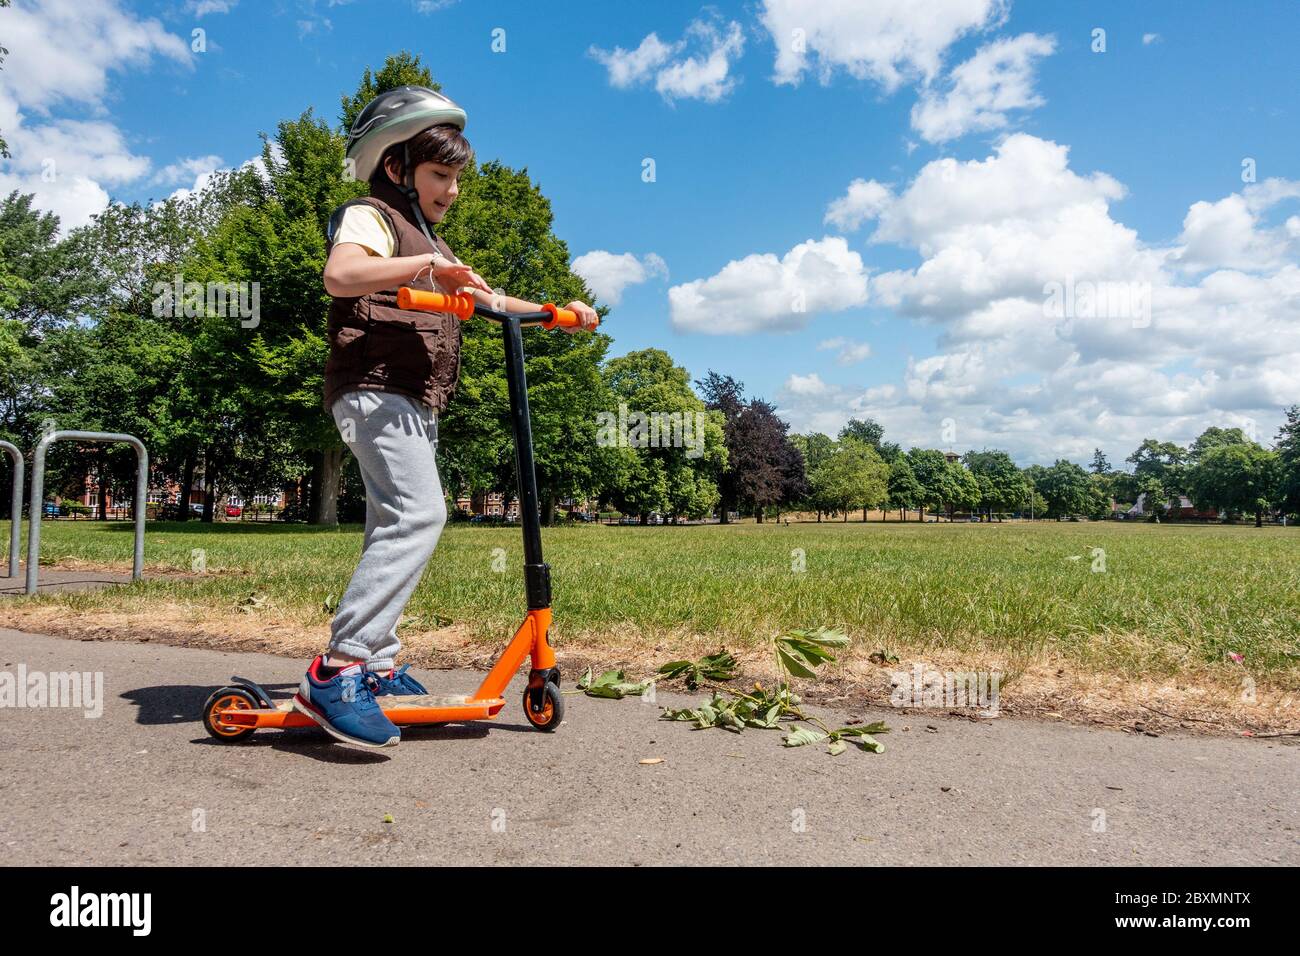 A young boy plays with and pushes his scooter on a sunny day in the park. Blue sky and green trees. Energetic and active child. Stock Photo